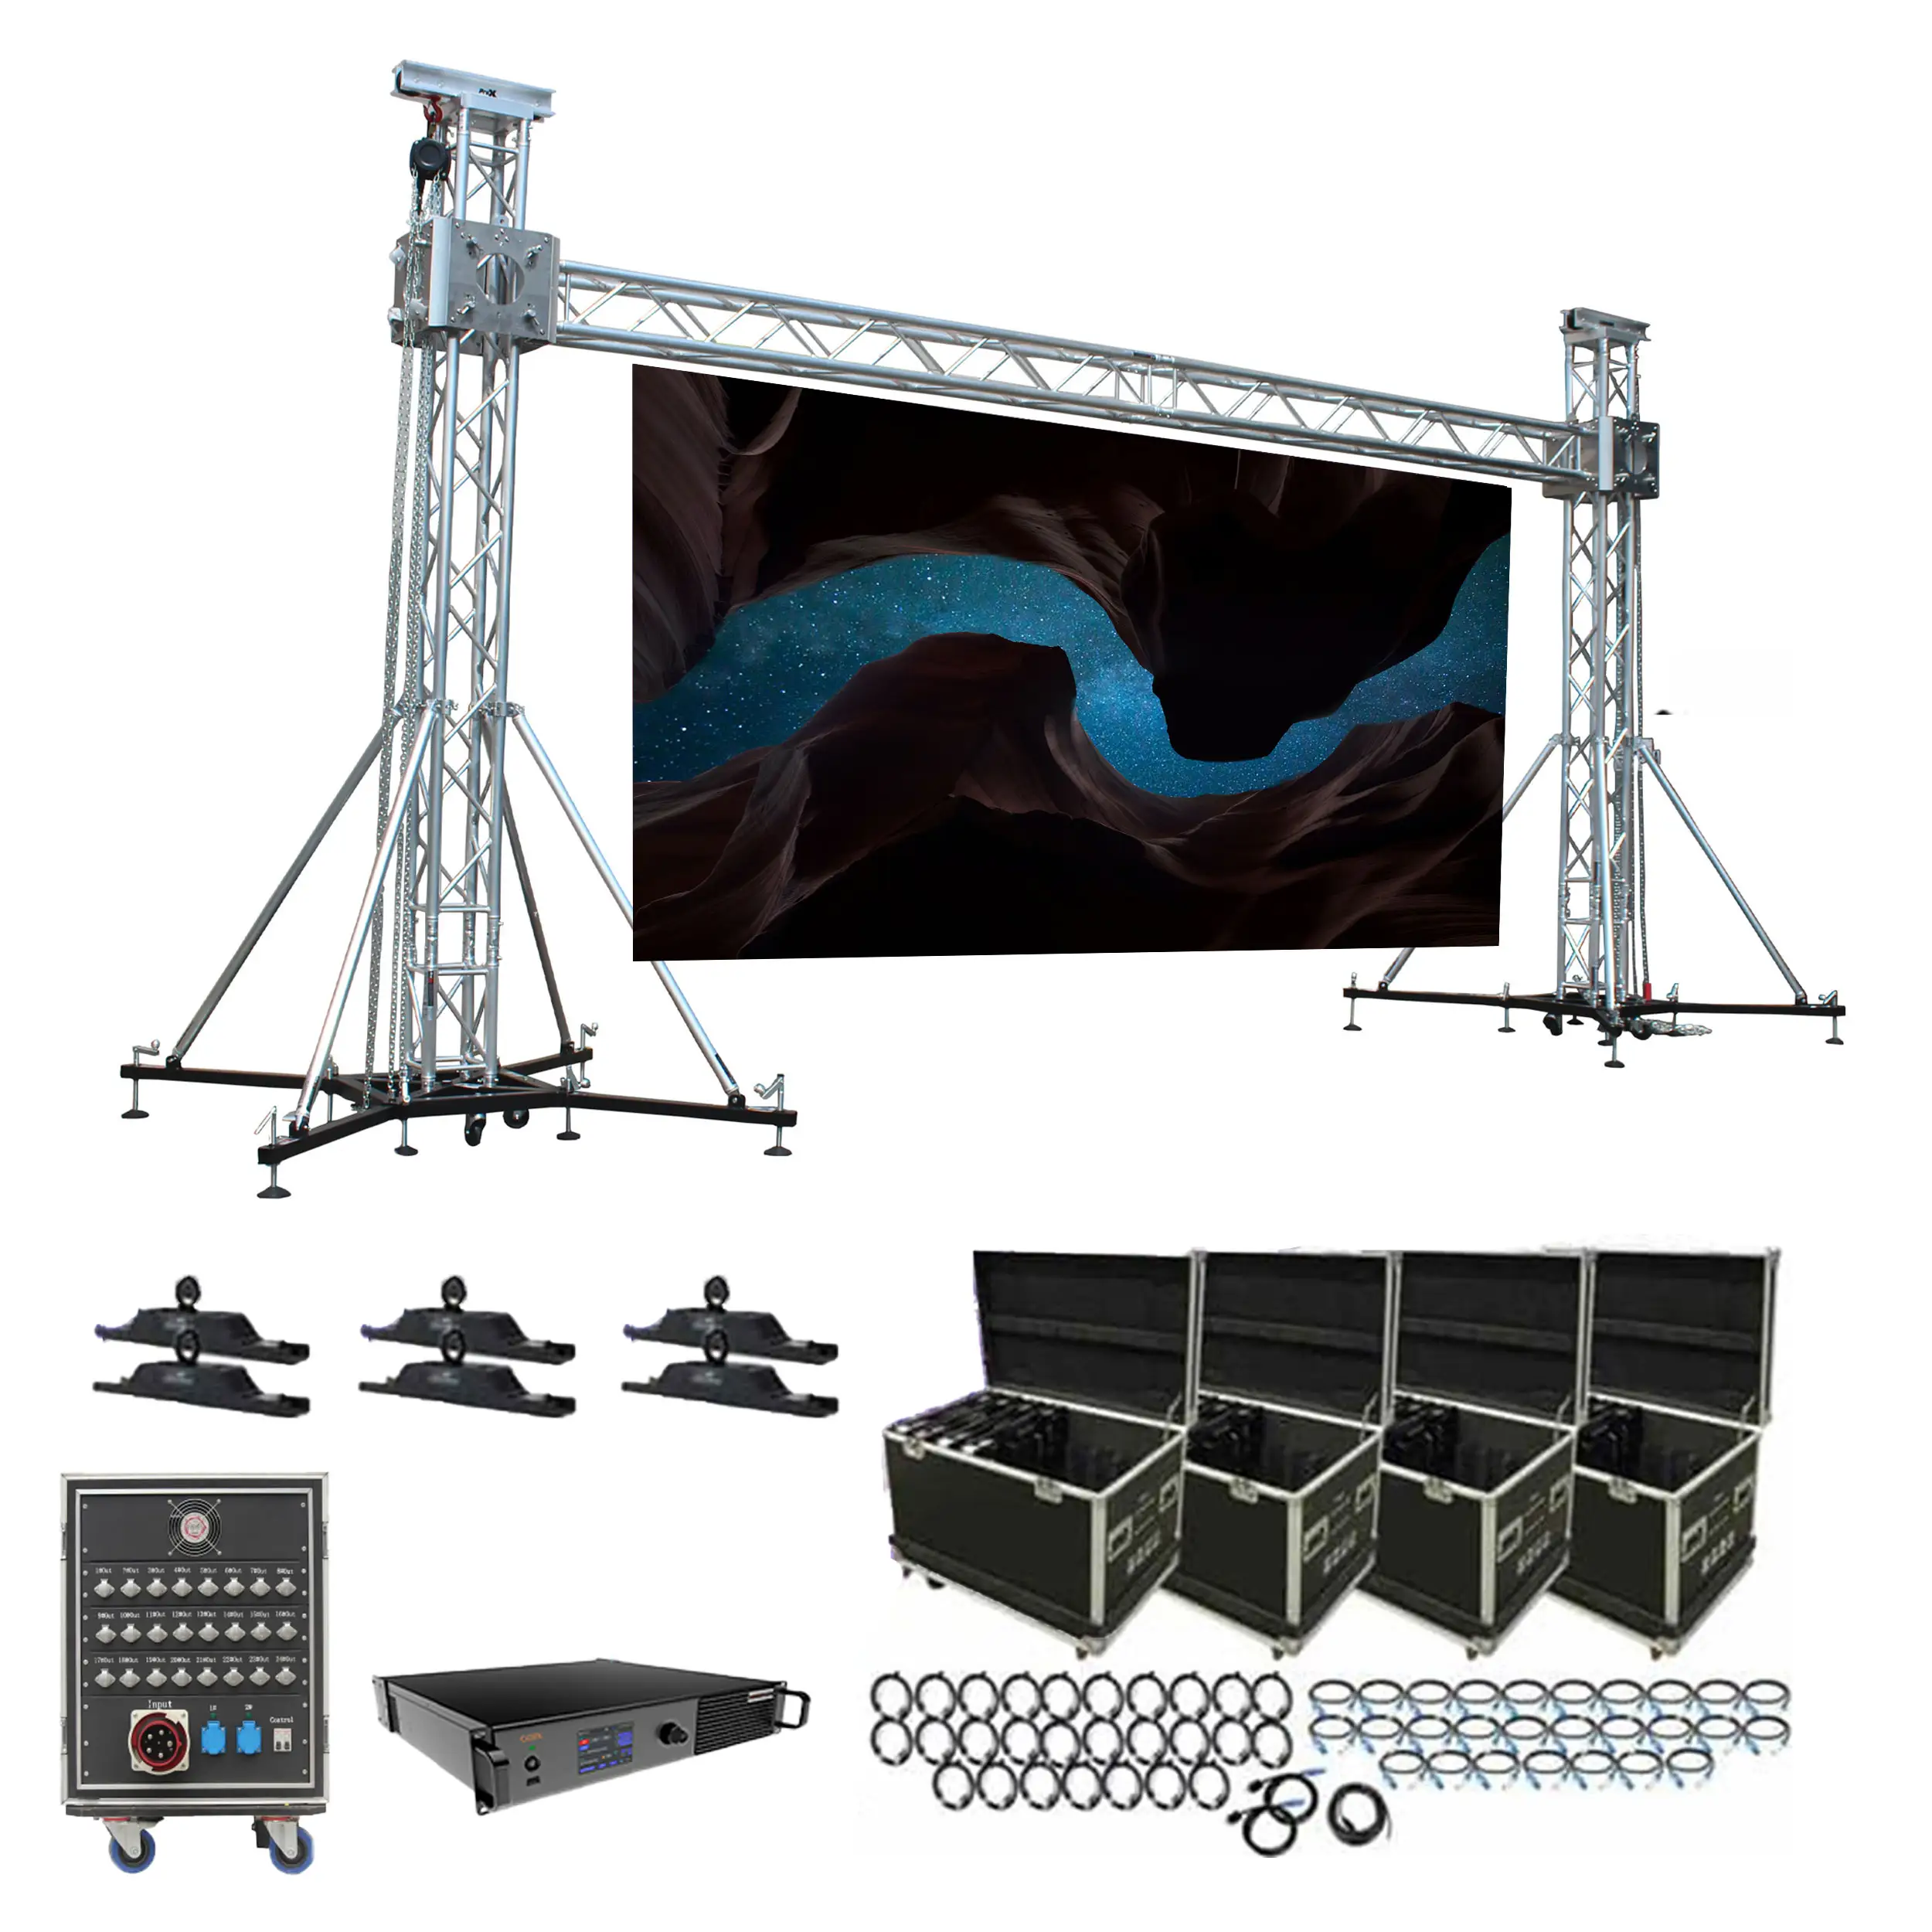 Ledseer 3X3 Video Wall 3X5 Club Screen Pitch 3.9 Pantallas Led P 3.91Outdoor